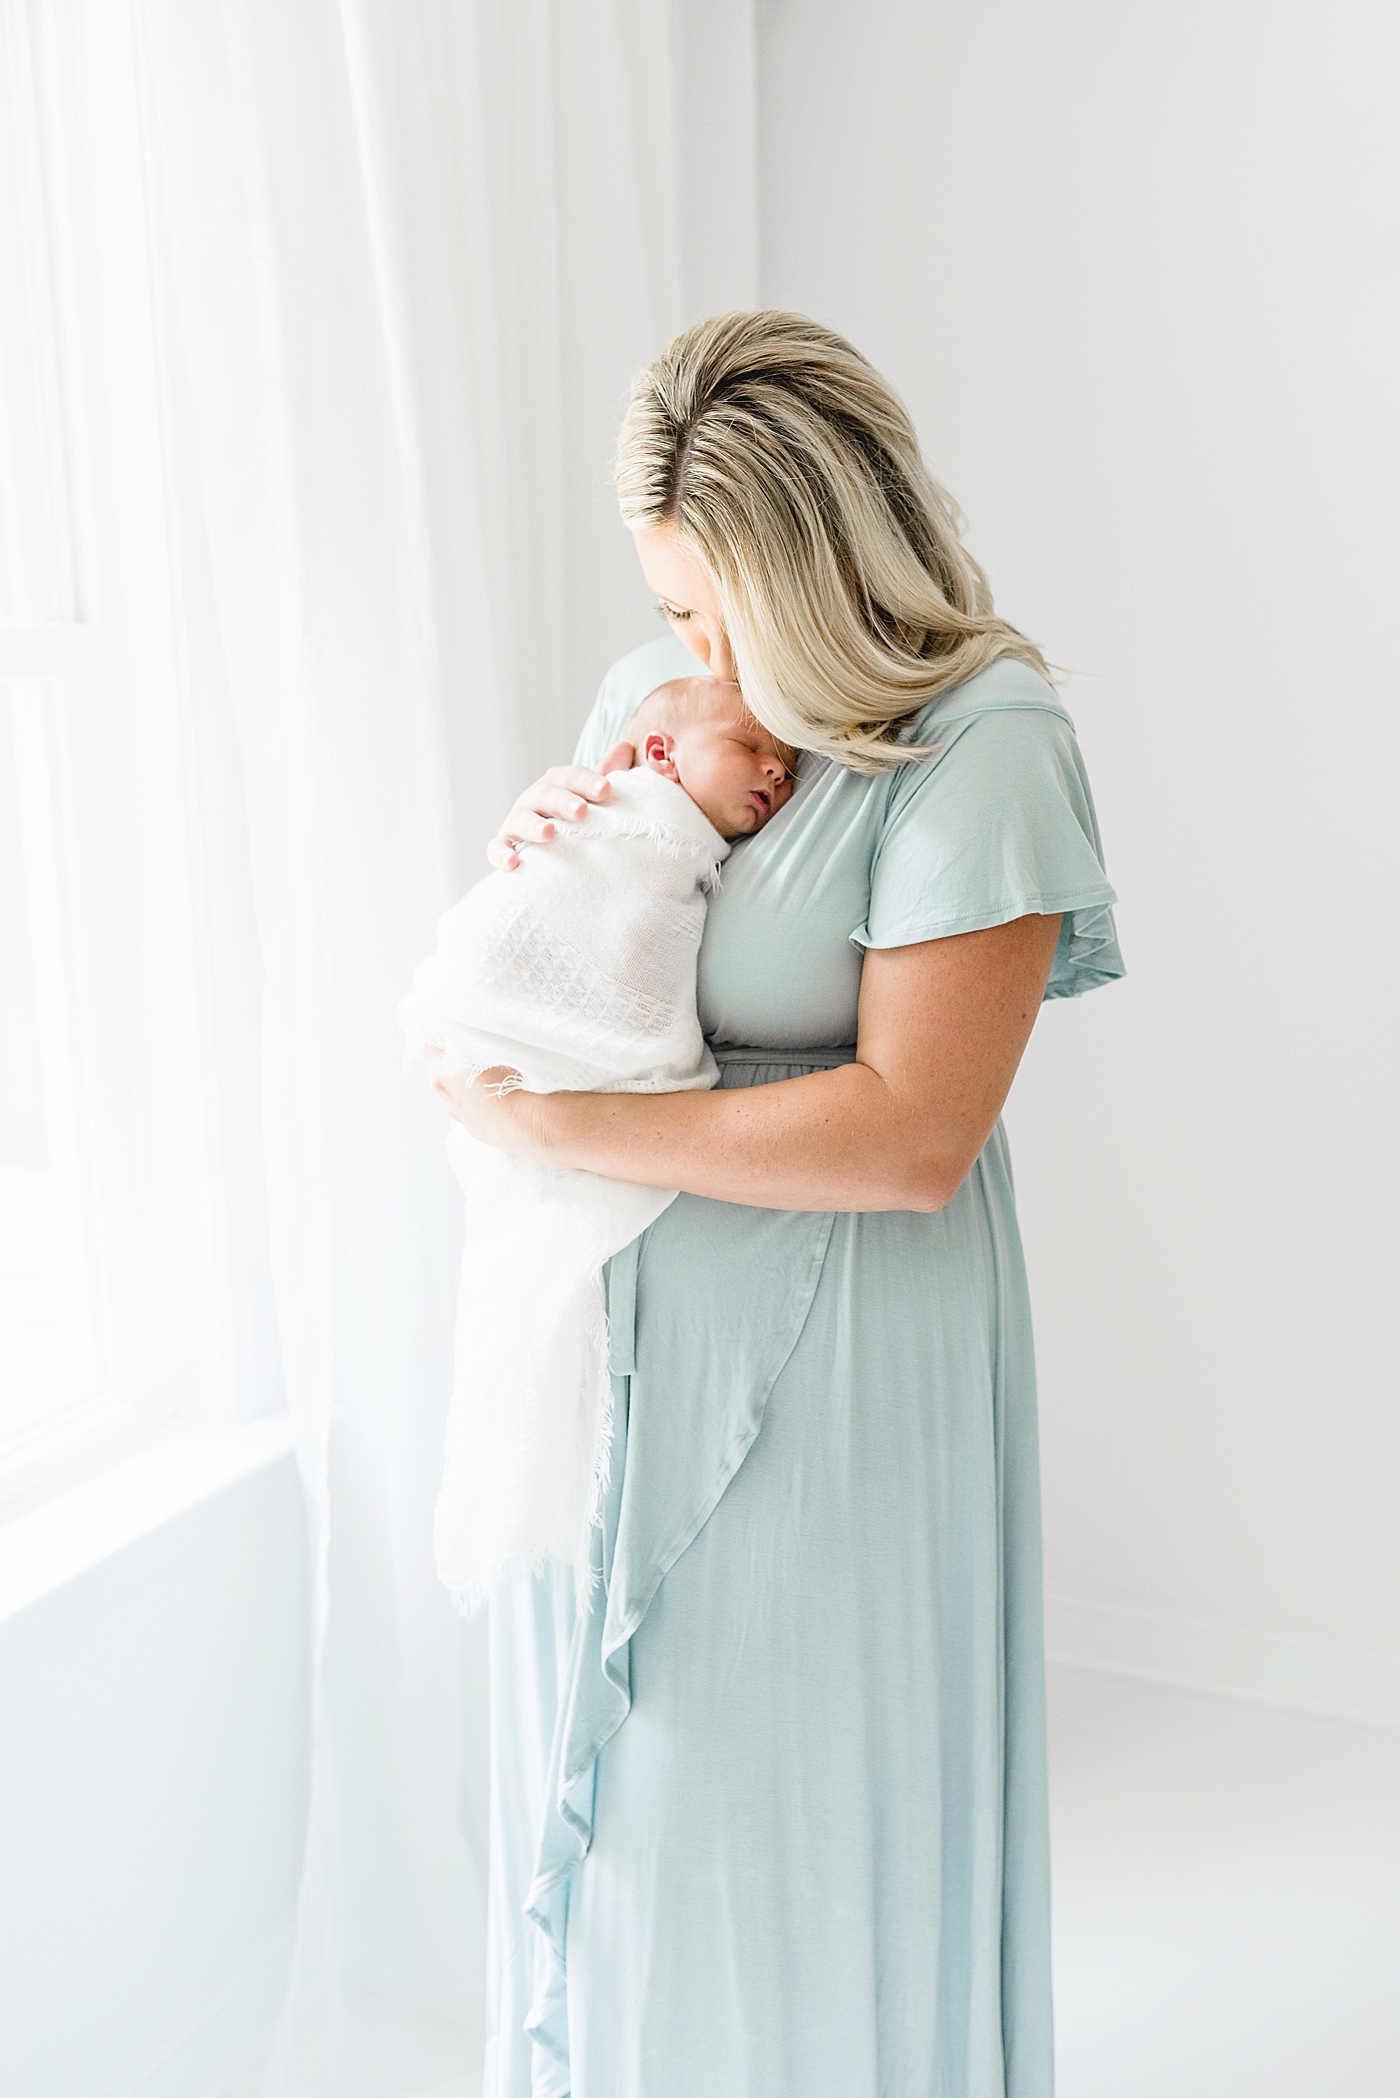 Mom in blue dress kissing newborn wrapped in white swaddle | Photo by Anna Wisjo Photography